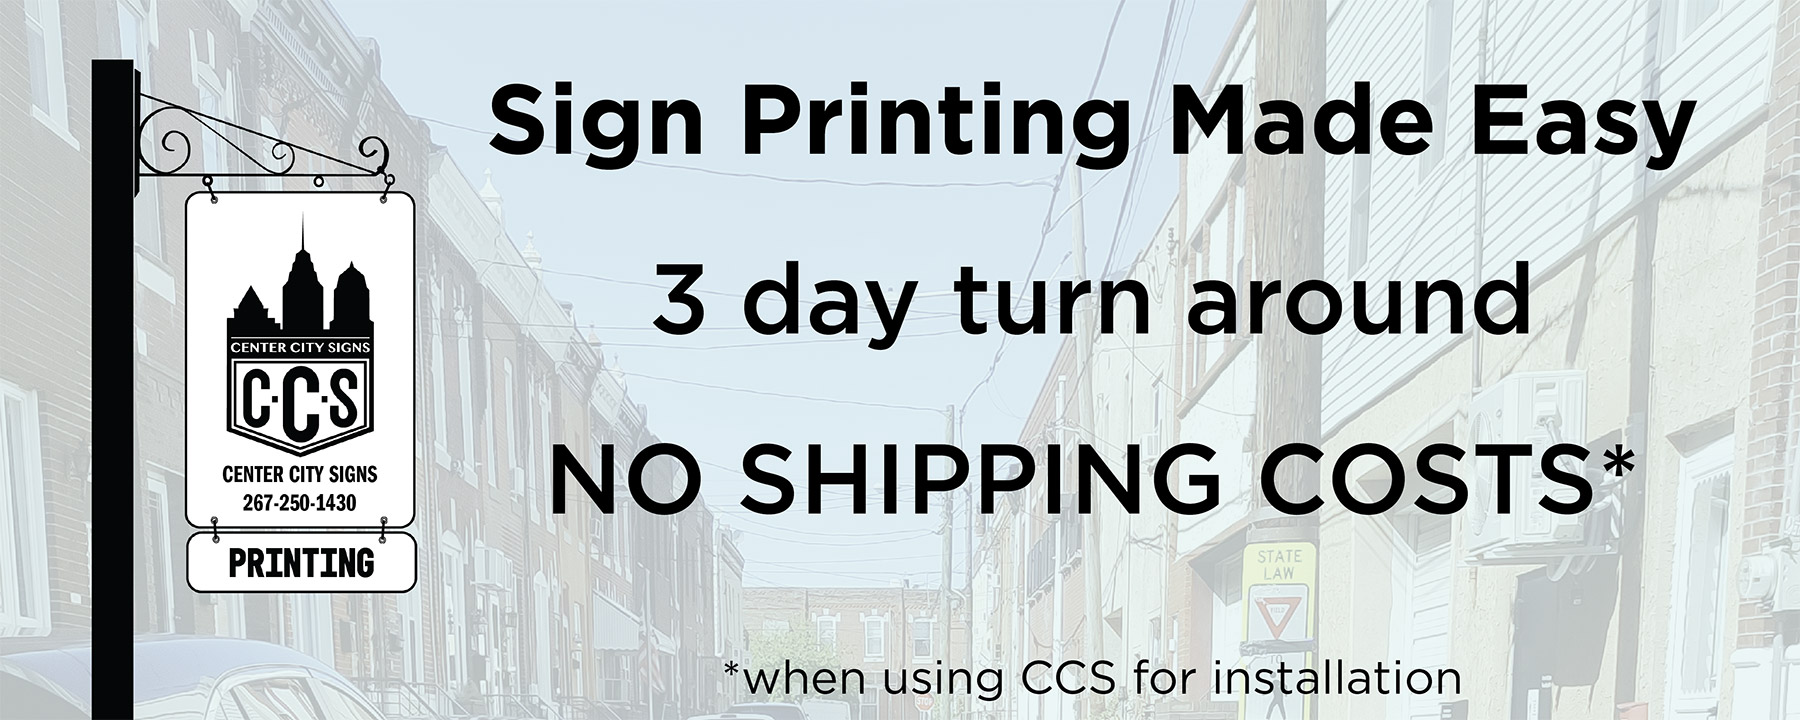 Sign Printing Made Easy - 3 day turn around - NO SHIPPING COSTS (when using CCS for installation)